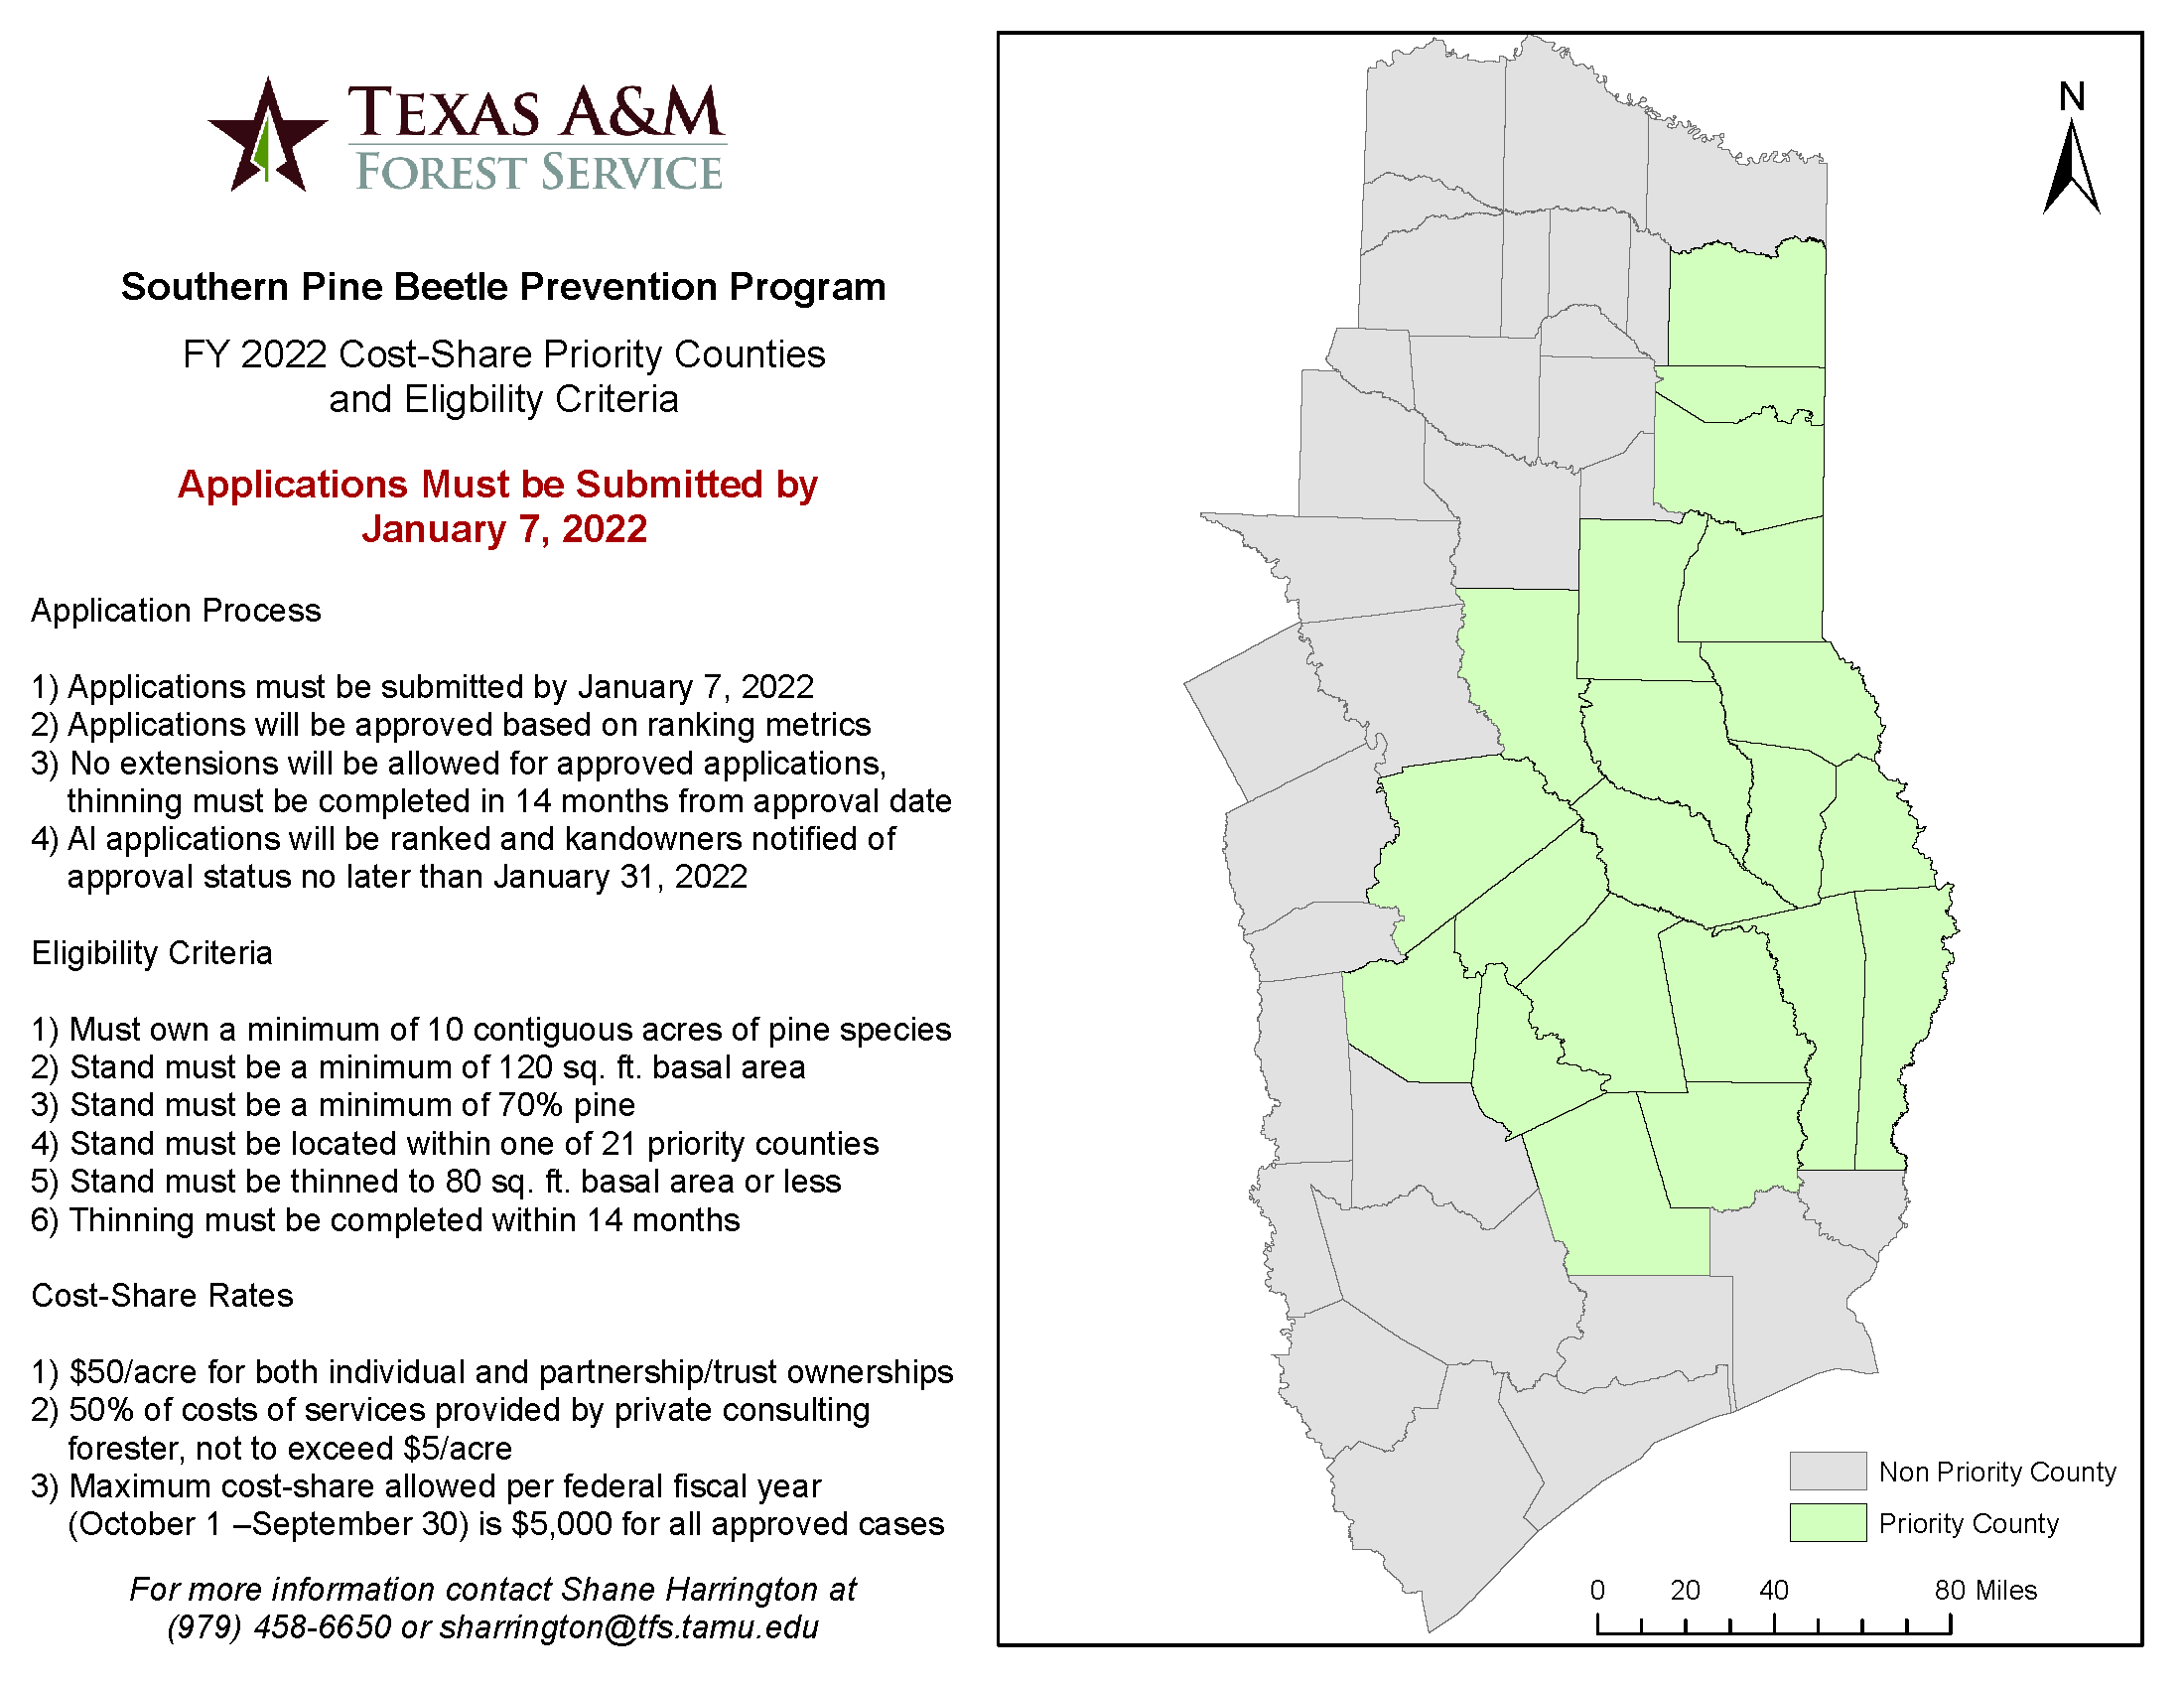 SPB grant FY 2022 updated map